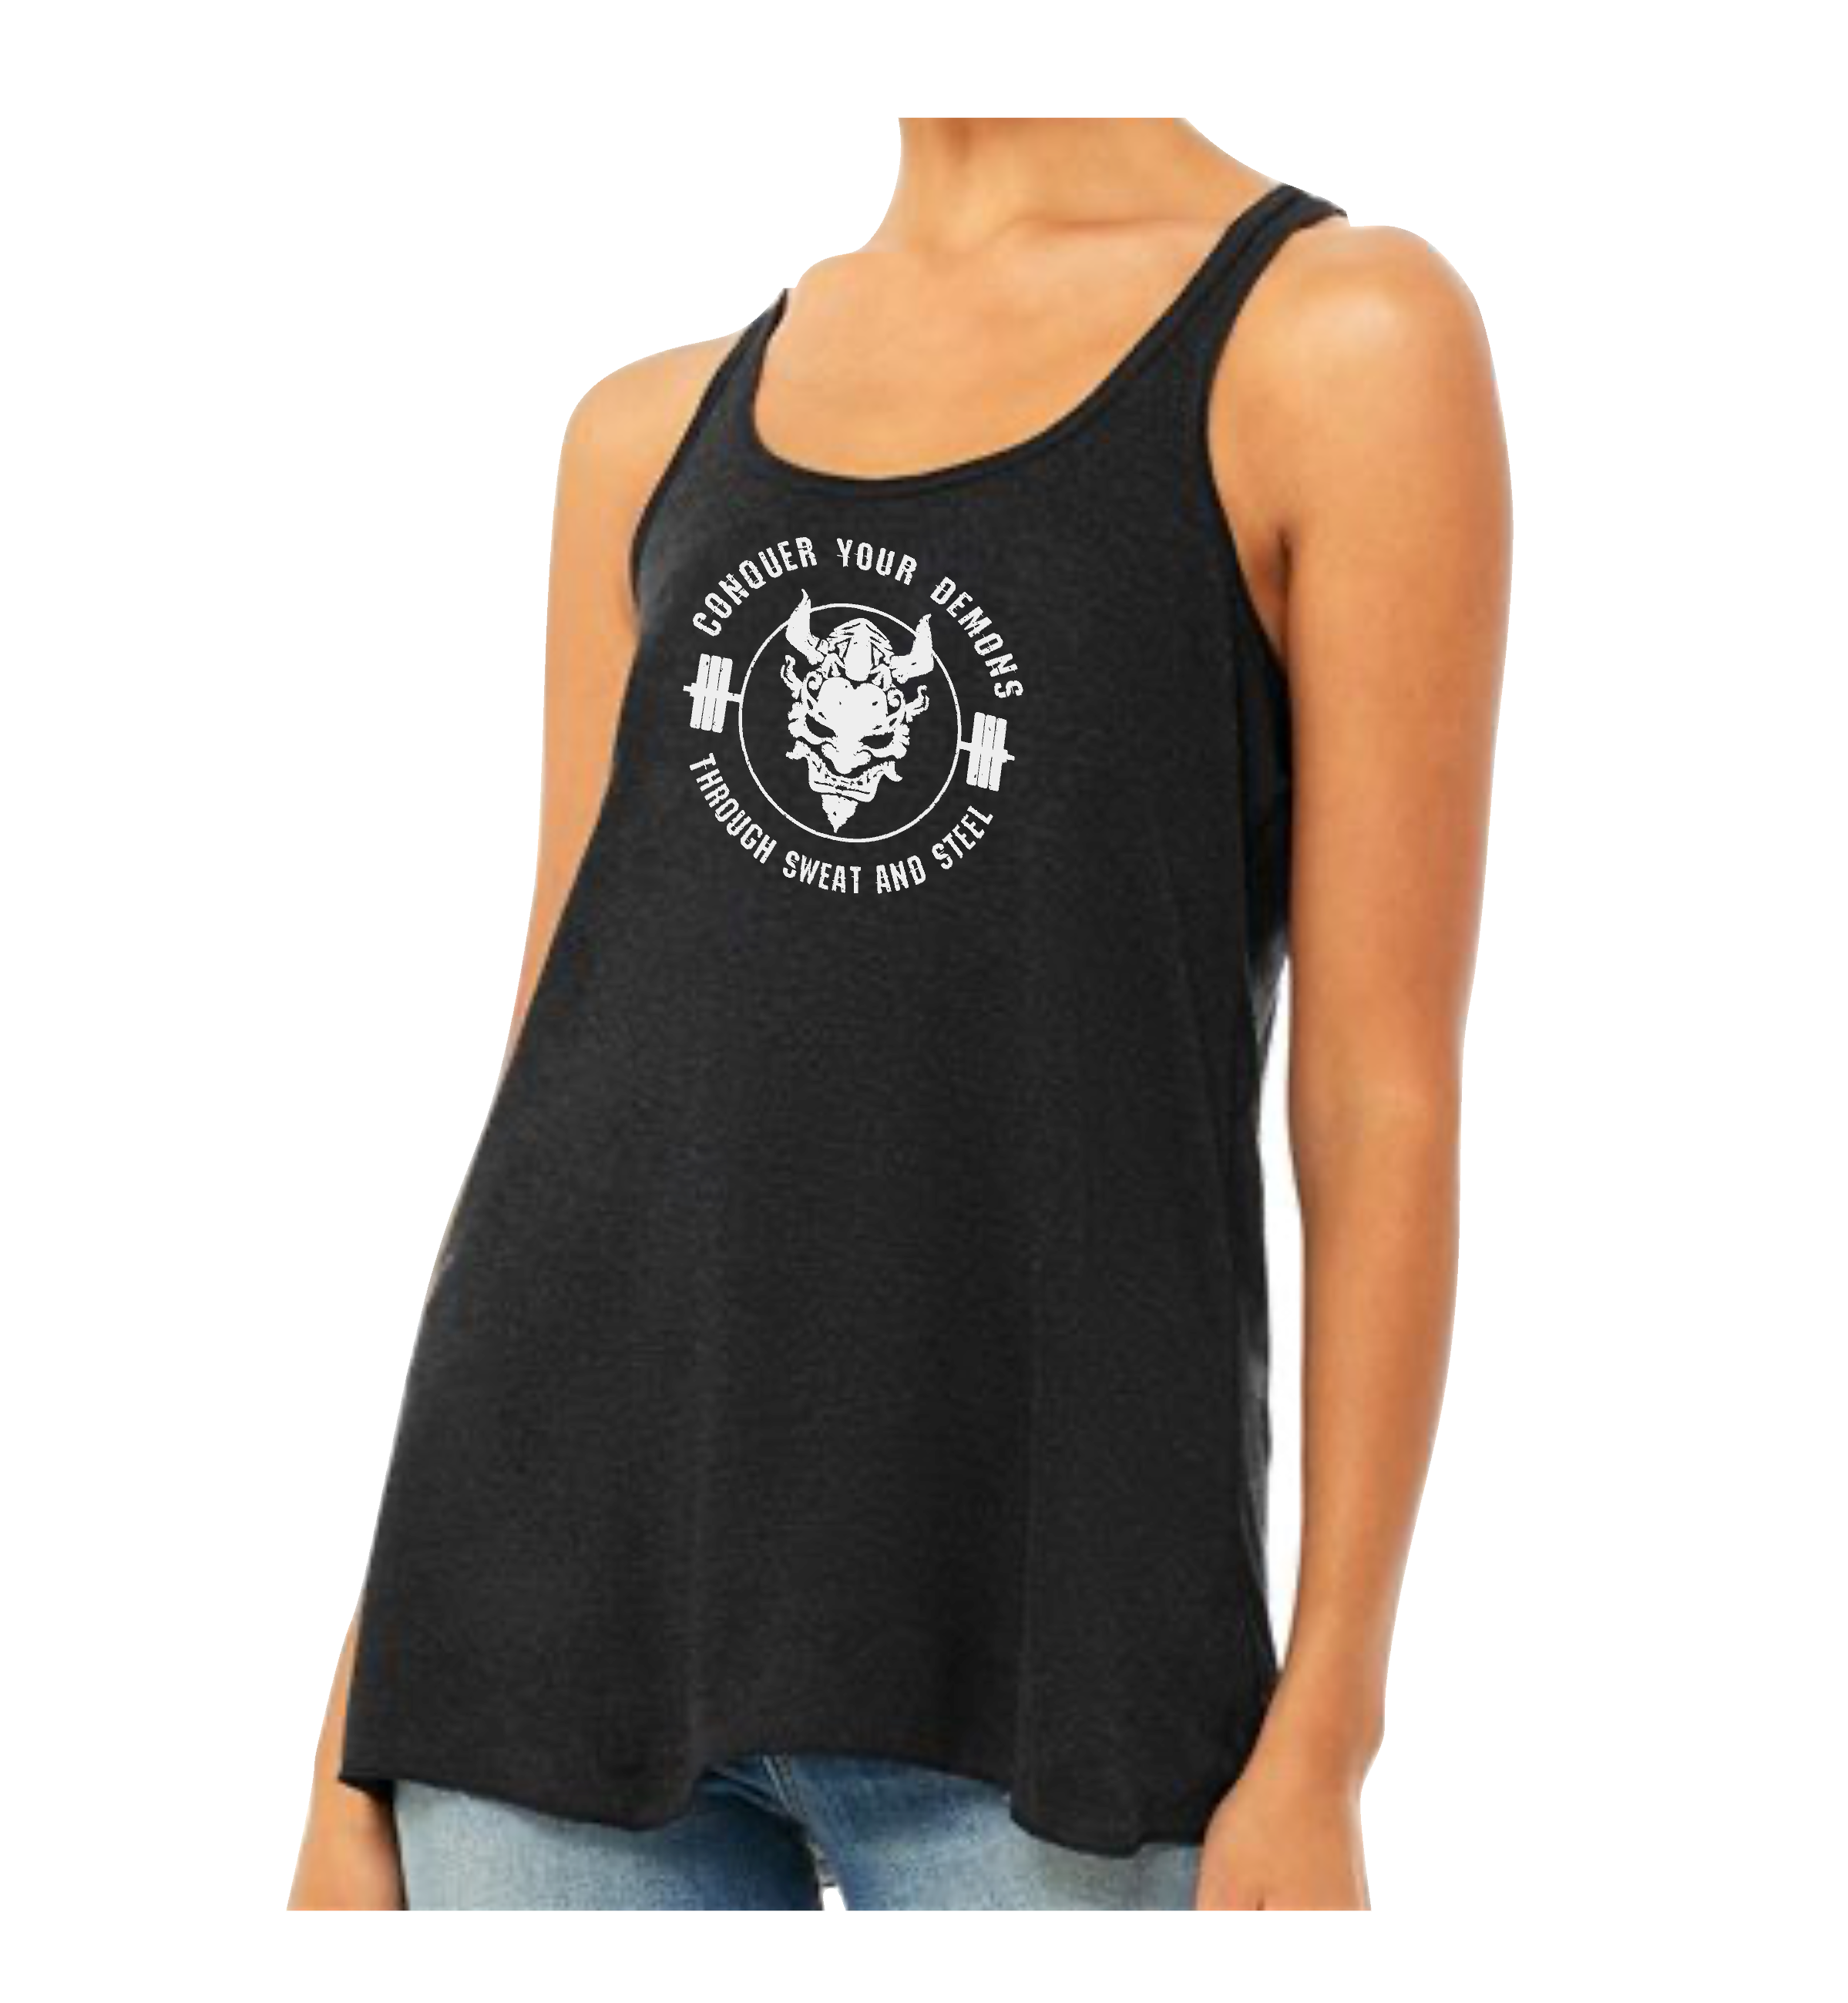 CONQUER YOUR DEMONS - WOMEN'S FLOWY SHIRRED RACERBACK TANK